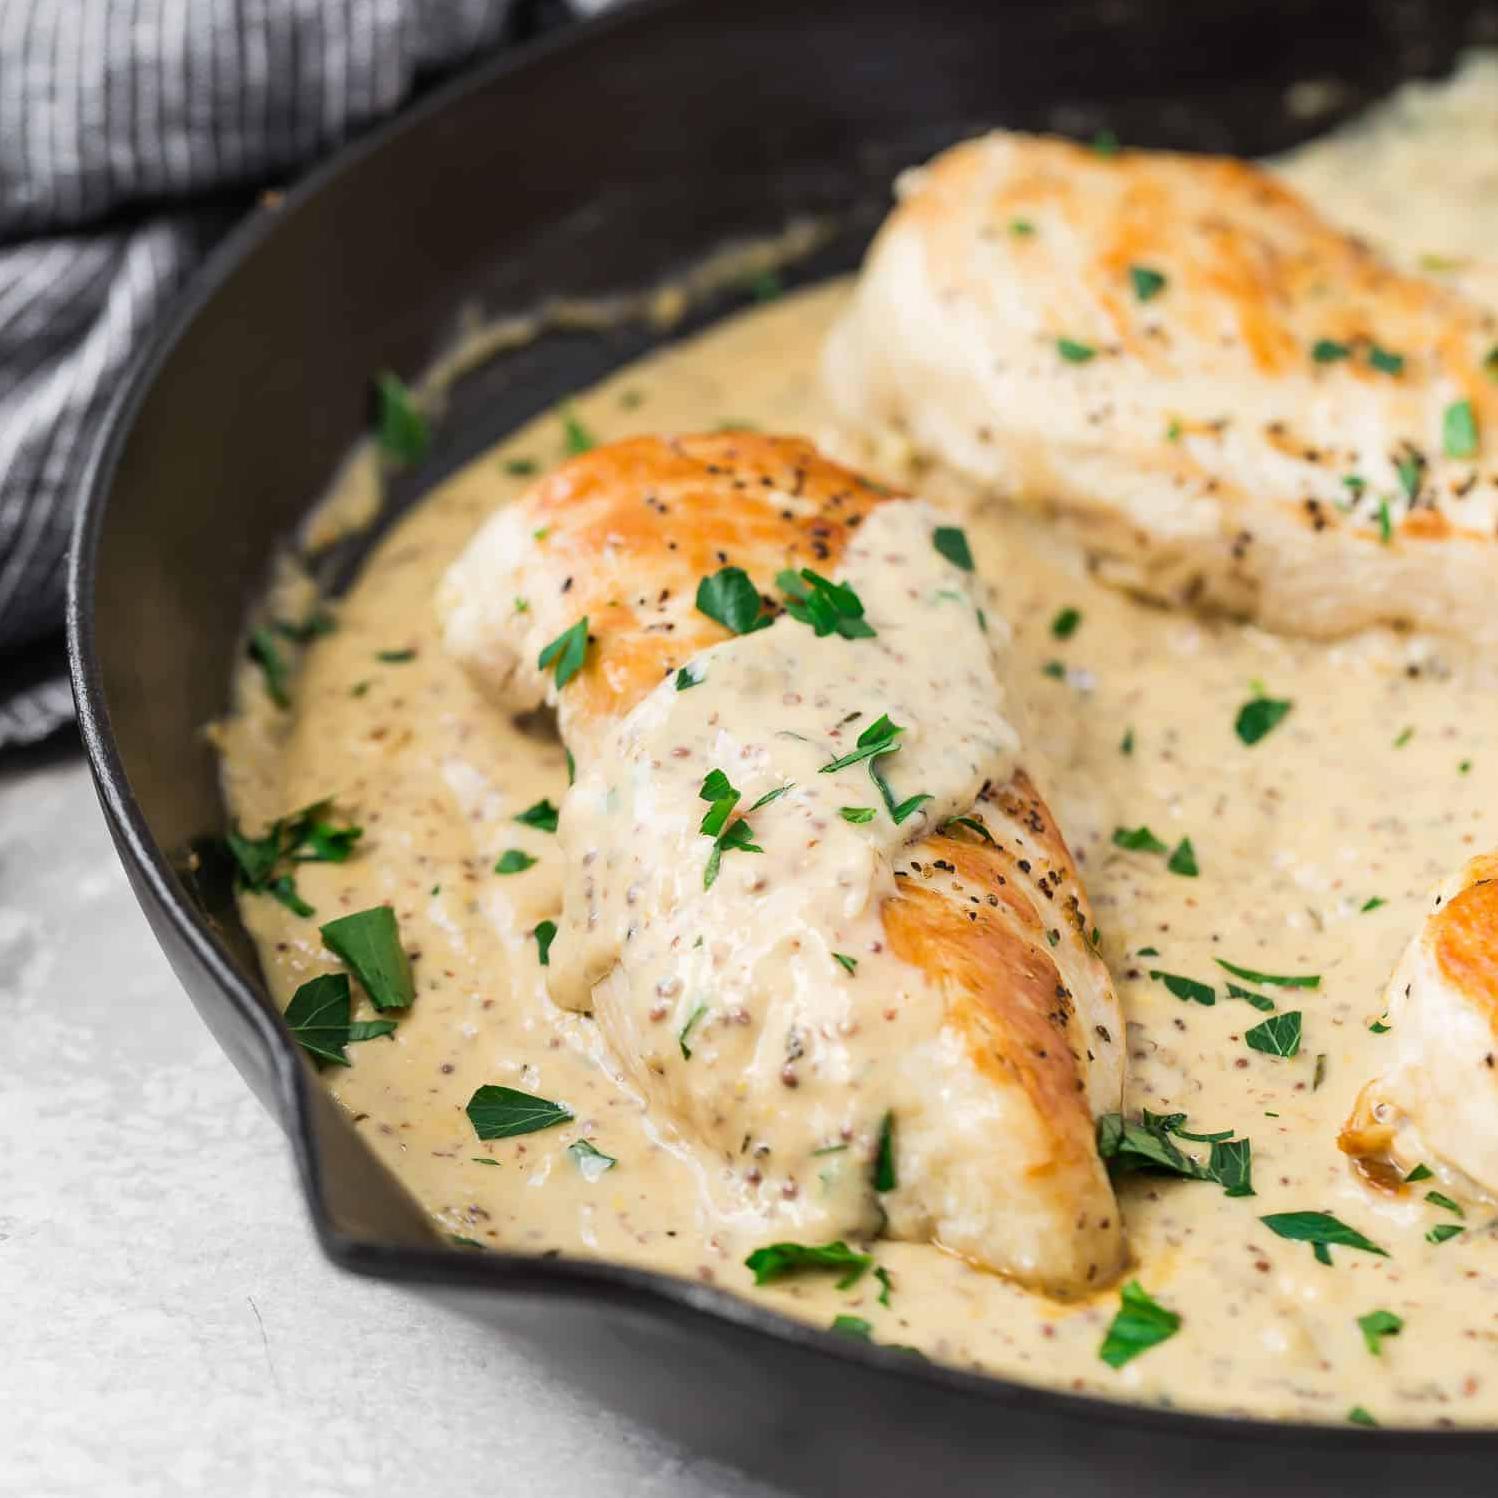  Get ready to indulge in this easy-to-make gourmet chicken dish.